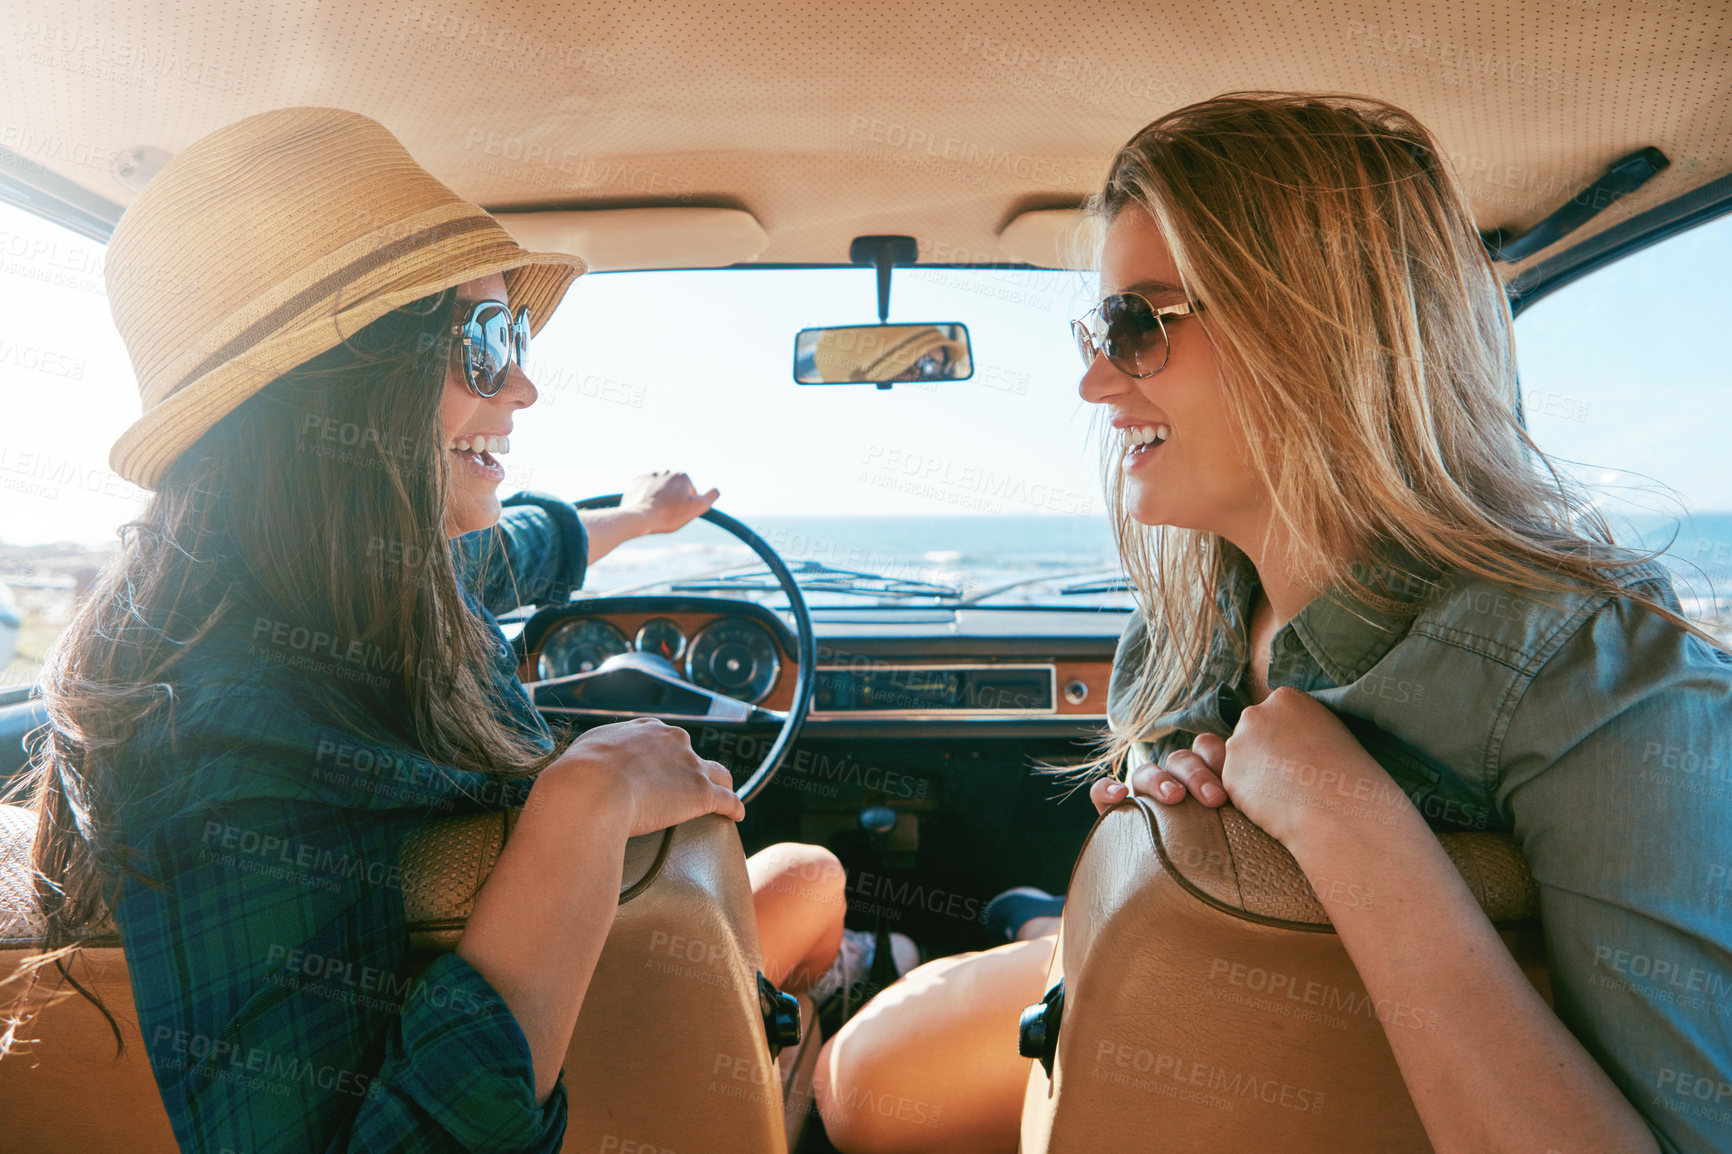 Buy stock photo Shot of two friends on a road trip near the ocean